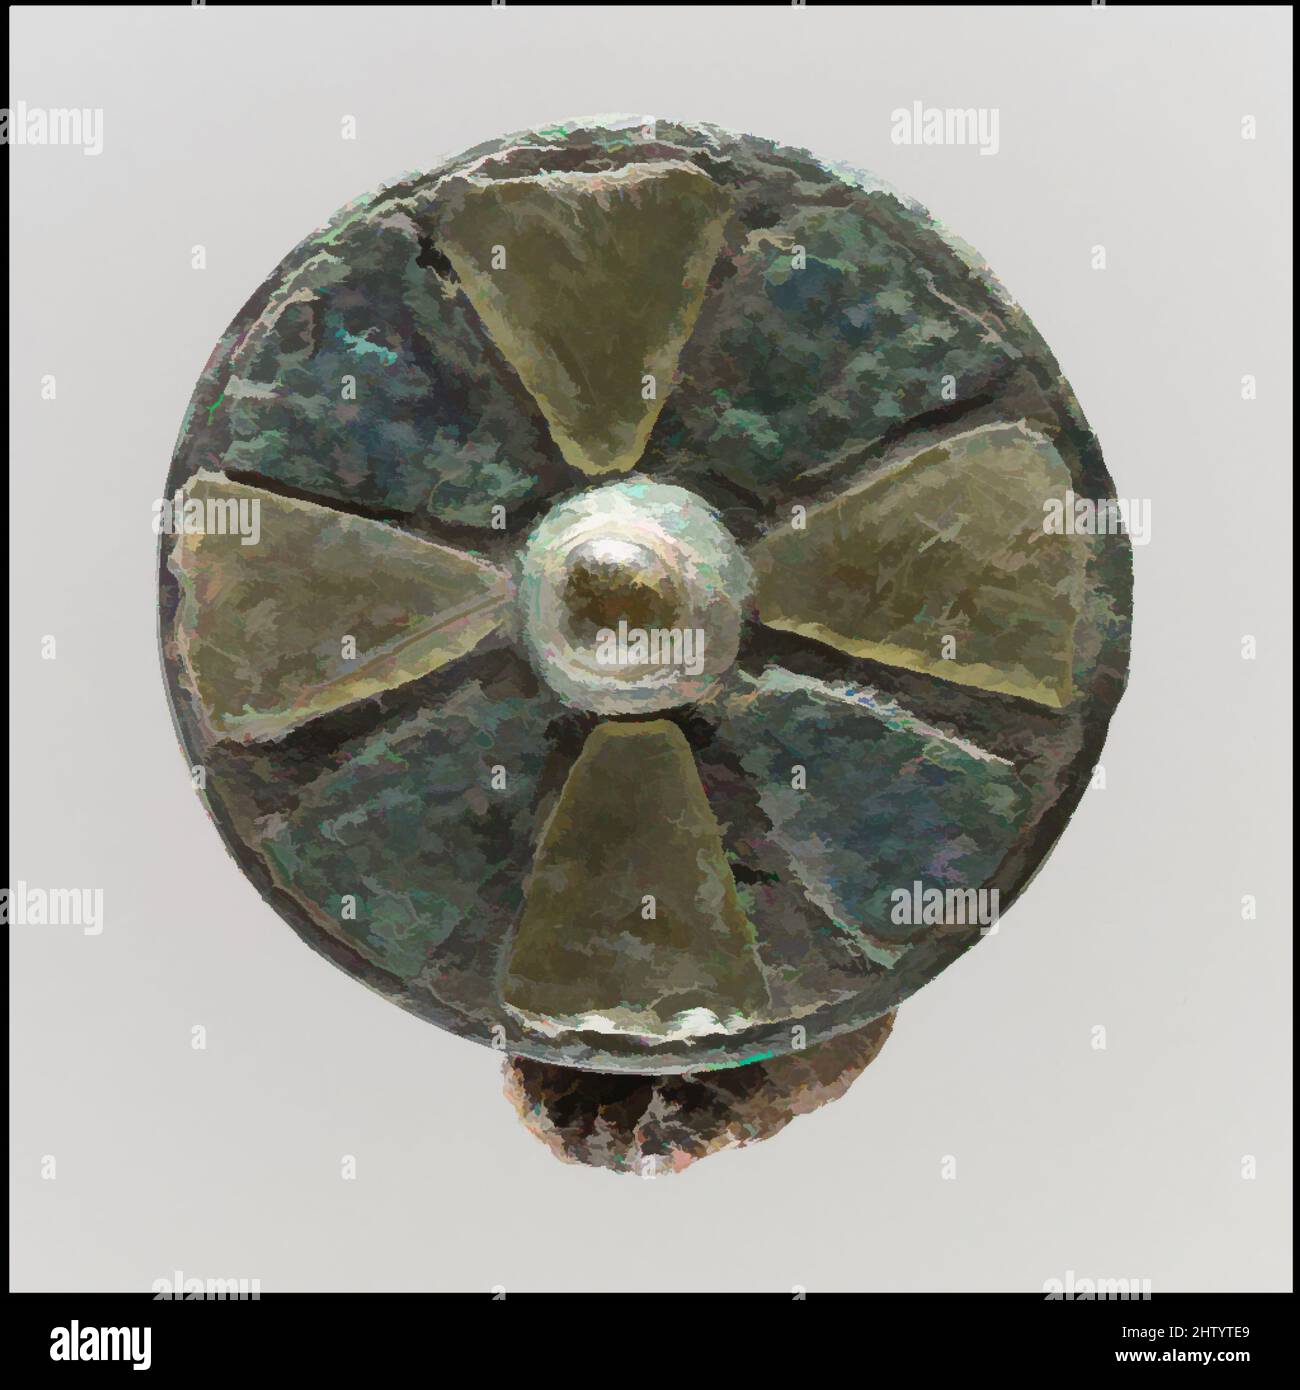 Art inspired by Disk Brooch, 6th century, Frankish, Copper alloy cloisons, side and back; glass and patterned copper alloy, Overall: 1 3/8 x 13/16 in. (3.5 x 2 cm), Metalwork-Copper, Garnets, worked in the cloisonné technique, featured prominently in the luxury jewelry of the Franks, Classic works modernized by Artotop with a splash of modernity. Shapes, color and value, eye-catching visual impact on art. Emotions through freedom of artworks in a contemporary way. A timeless message pursuing a wildly creative new direction. Artists turning to the digital medium and creating the Artotop NFT Stock Photo